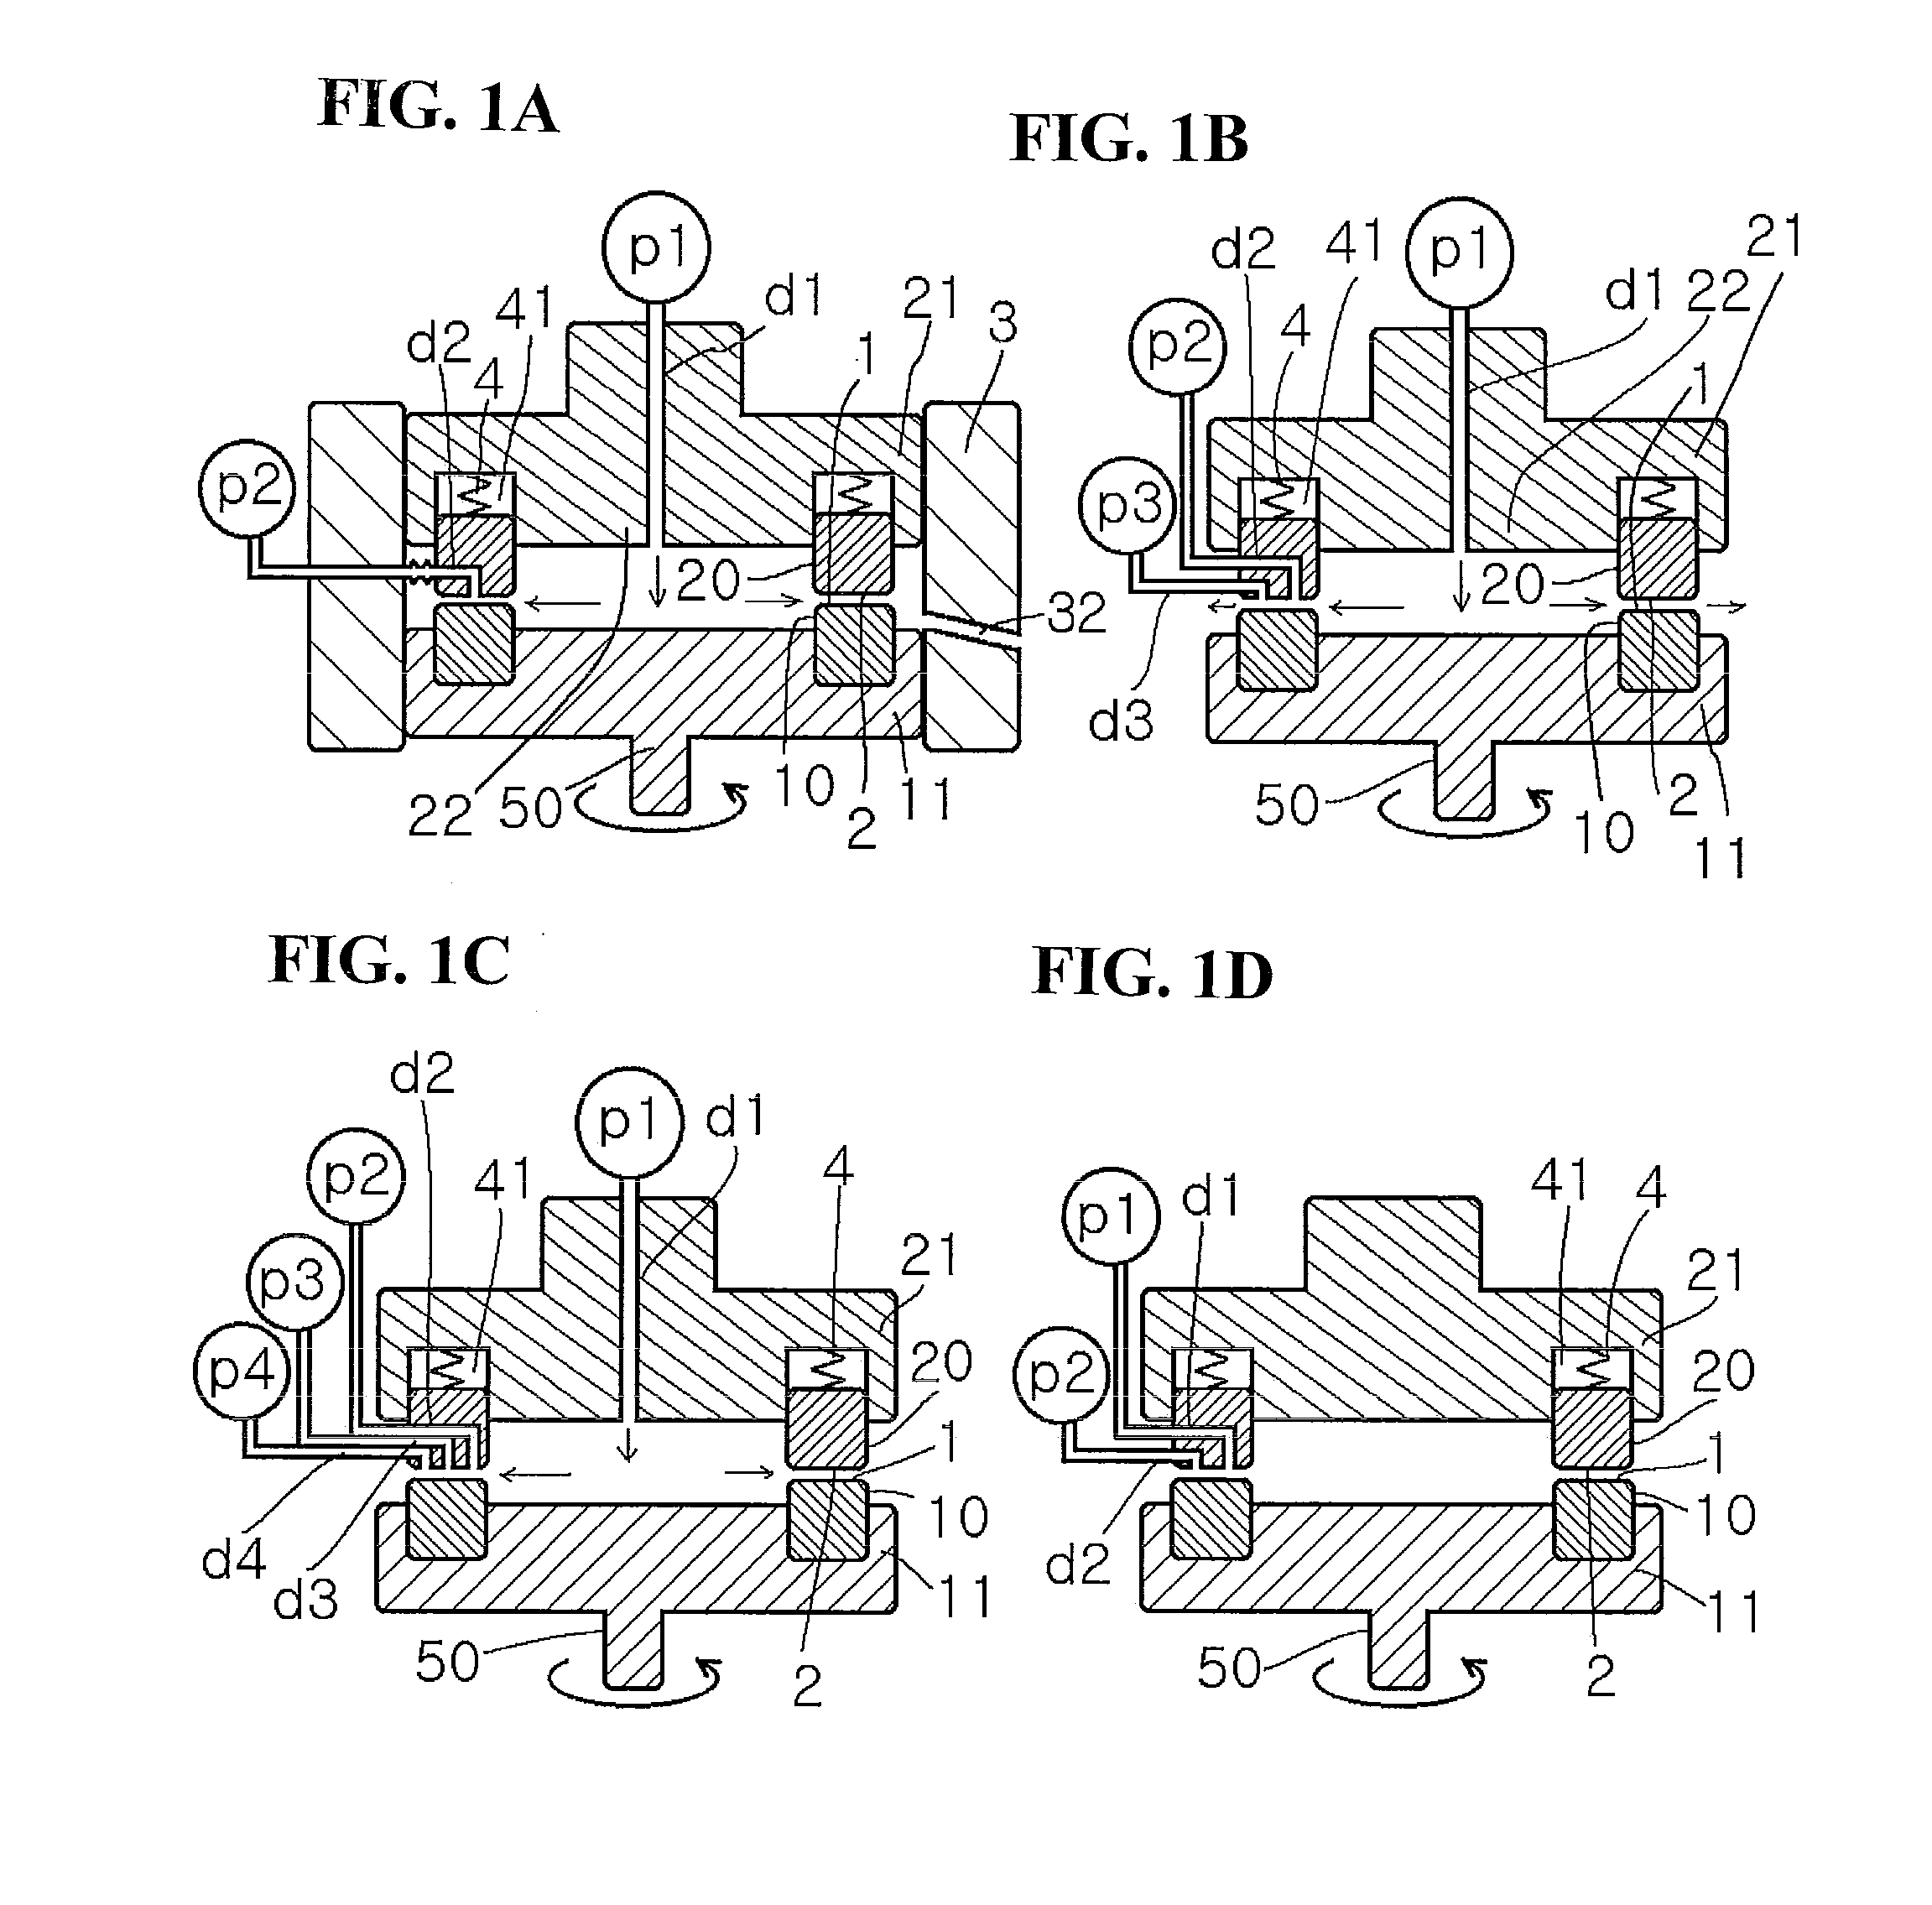 Method for producing metal-supported carbon, method for producing crystals consisting of fullerene molecules and fullerene nanowhisker/nanofiber nanotubes, and apparatus for producing the same